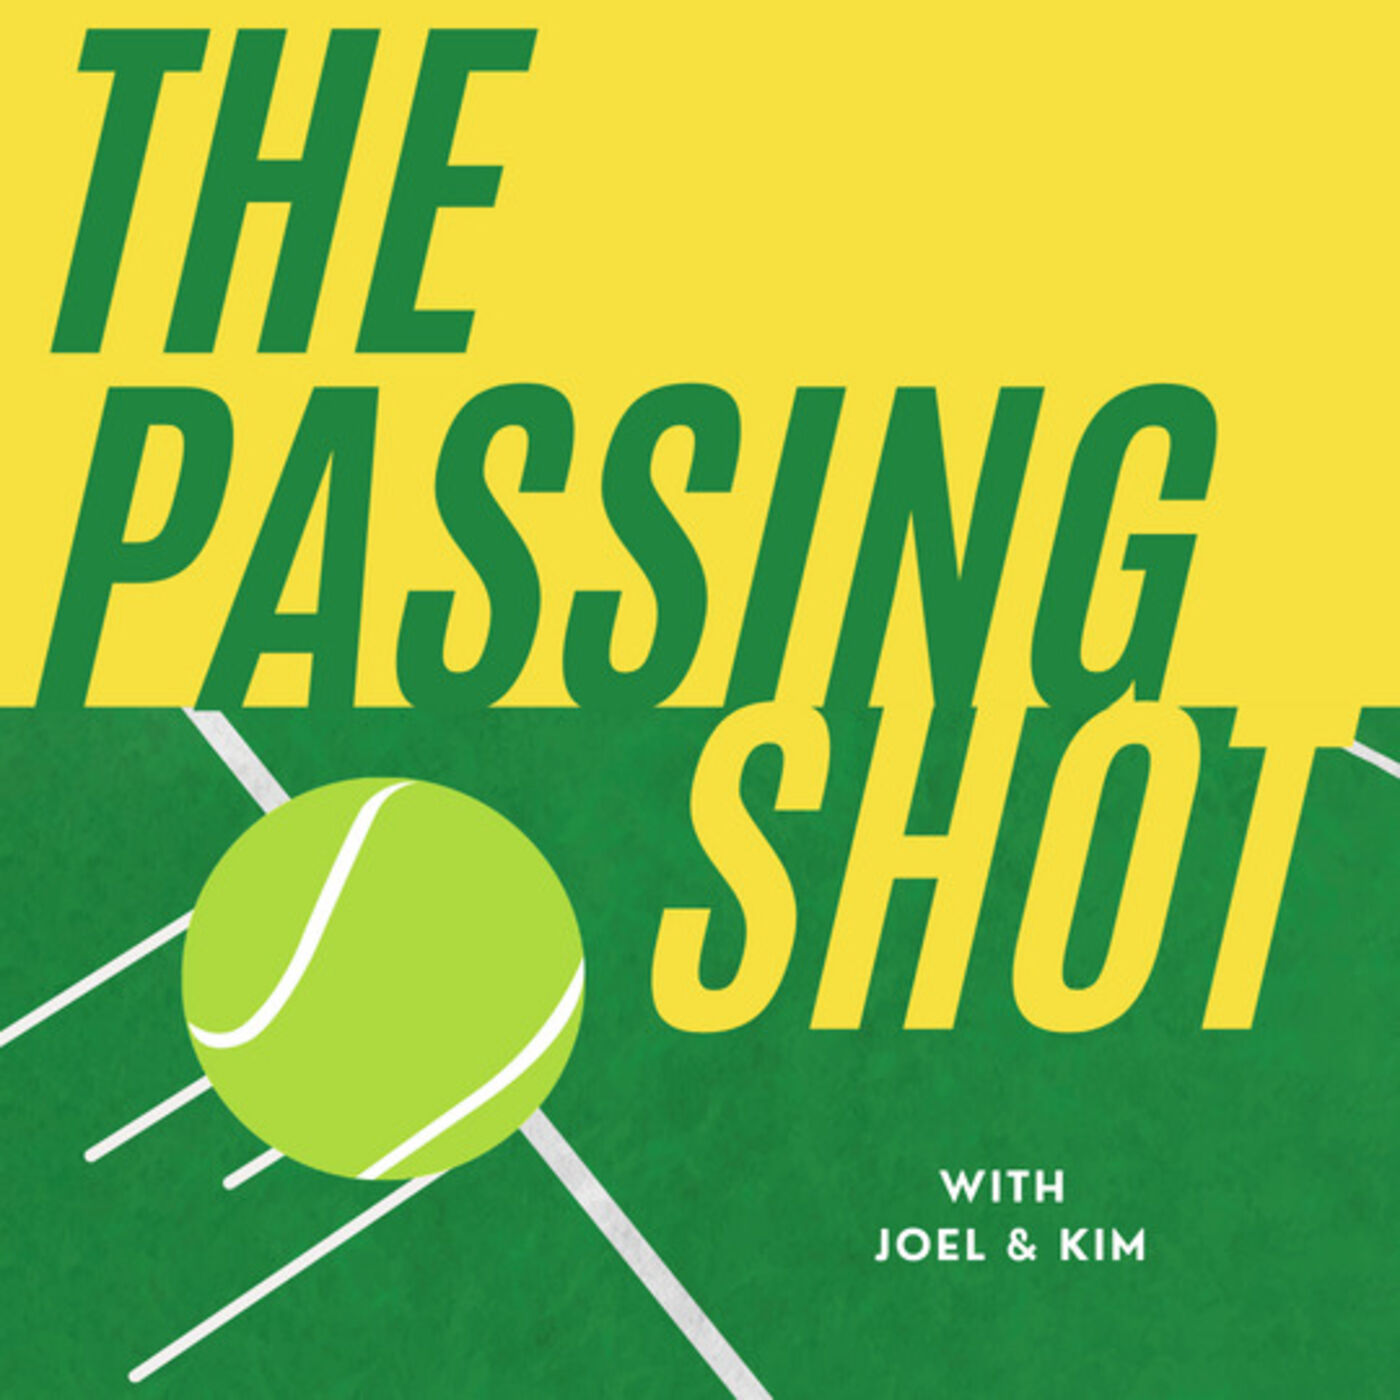 cover art for The Catch-Up show with Joel & Kim: Medvedev magic in Paris; Nadal joins 1000 ATP tour wins club; Olya Sharypova 'My Story' interview; Top 8 for Tour Finals - first thoughts; Kyrgios opens up about mental health struggles; What does 2021 hold for Federer?